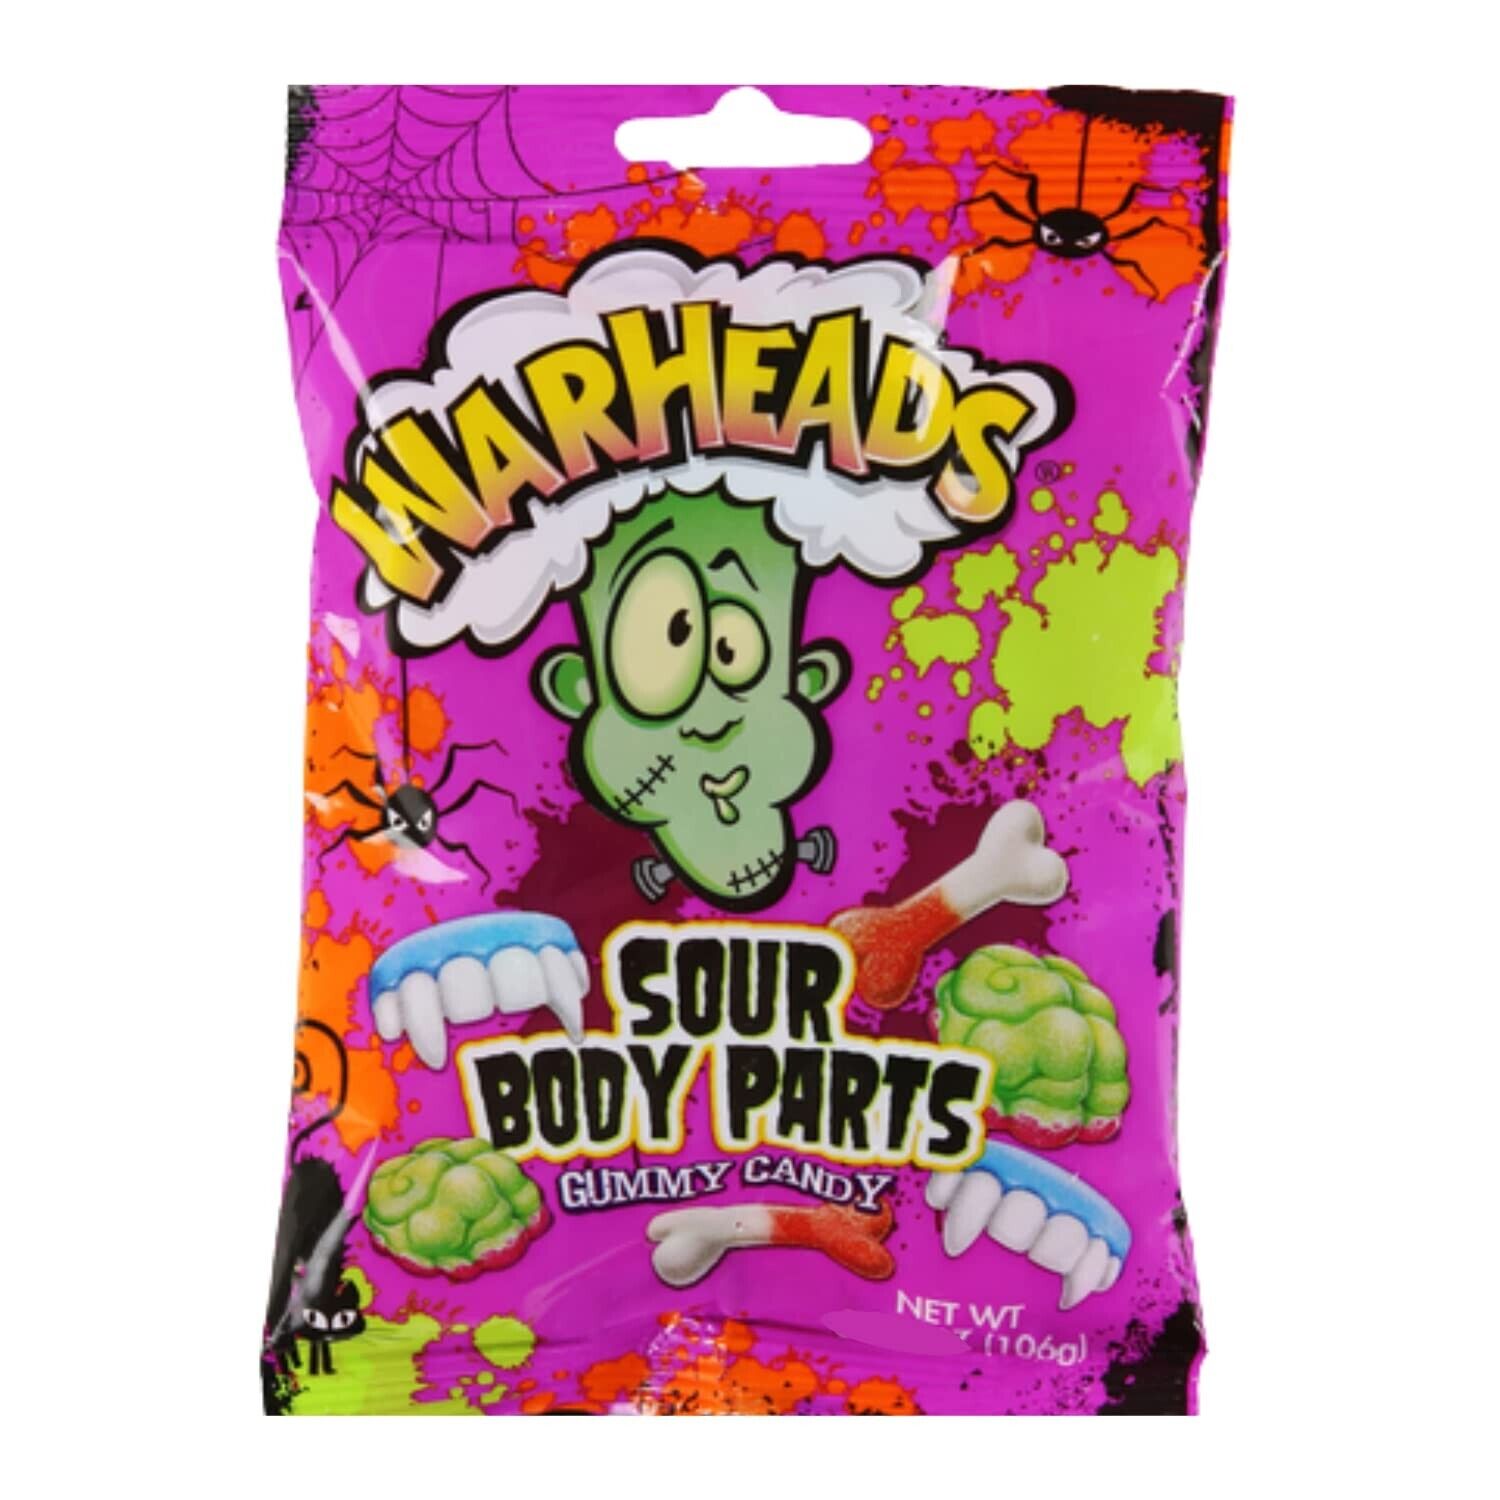 Warheads Sour Body Parts Gummy Candy 3 oz. Bag - All City Candy